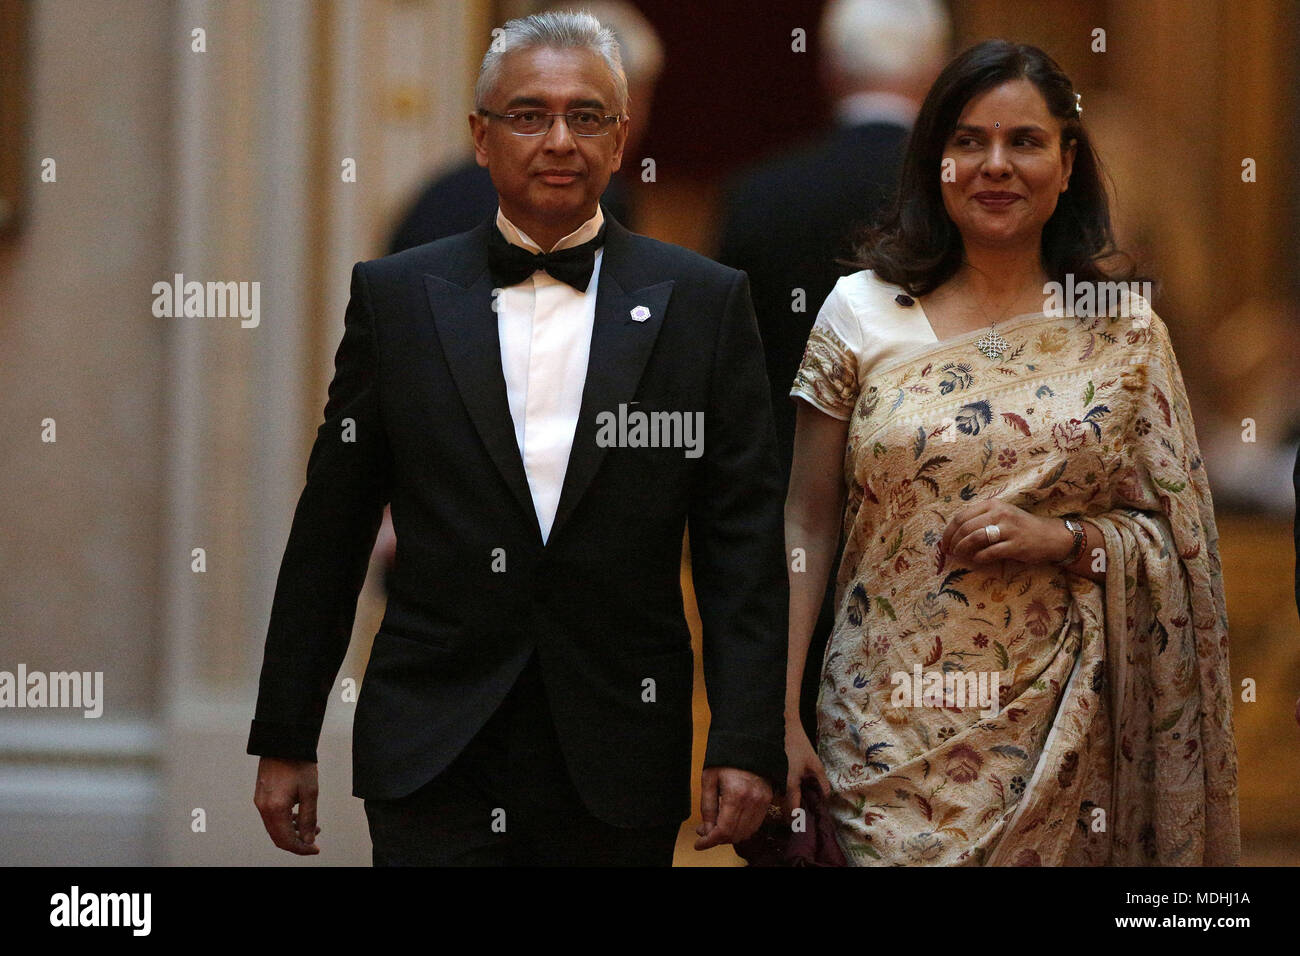 Mauritius Prime Minister Pravind Jugnauth and his wife Kobita Ramdanee arrive in the East Gallery at Buckingham Palace in London as Queen Elizabeth II hosts a dinner during the Commonwealth Heads of Government Meeting. Stock Photo